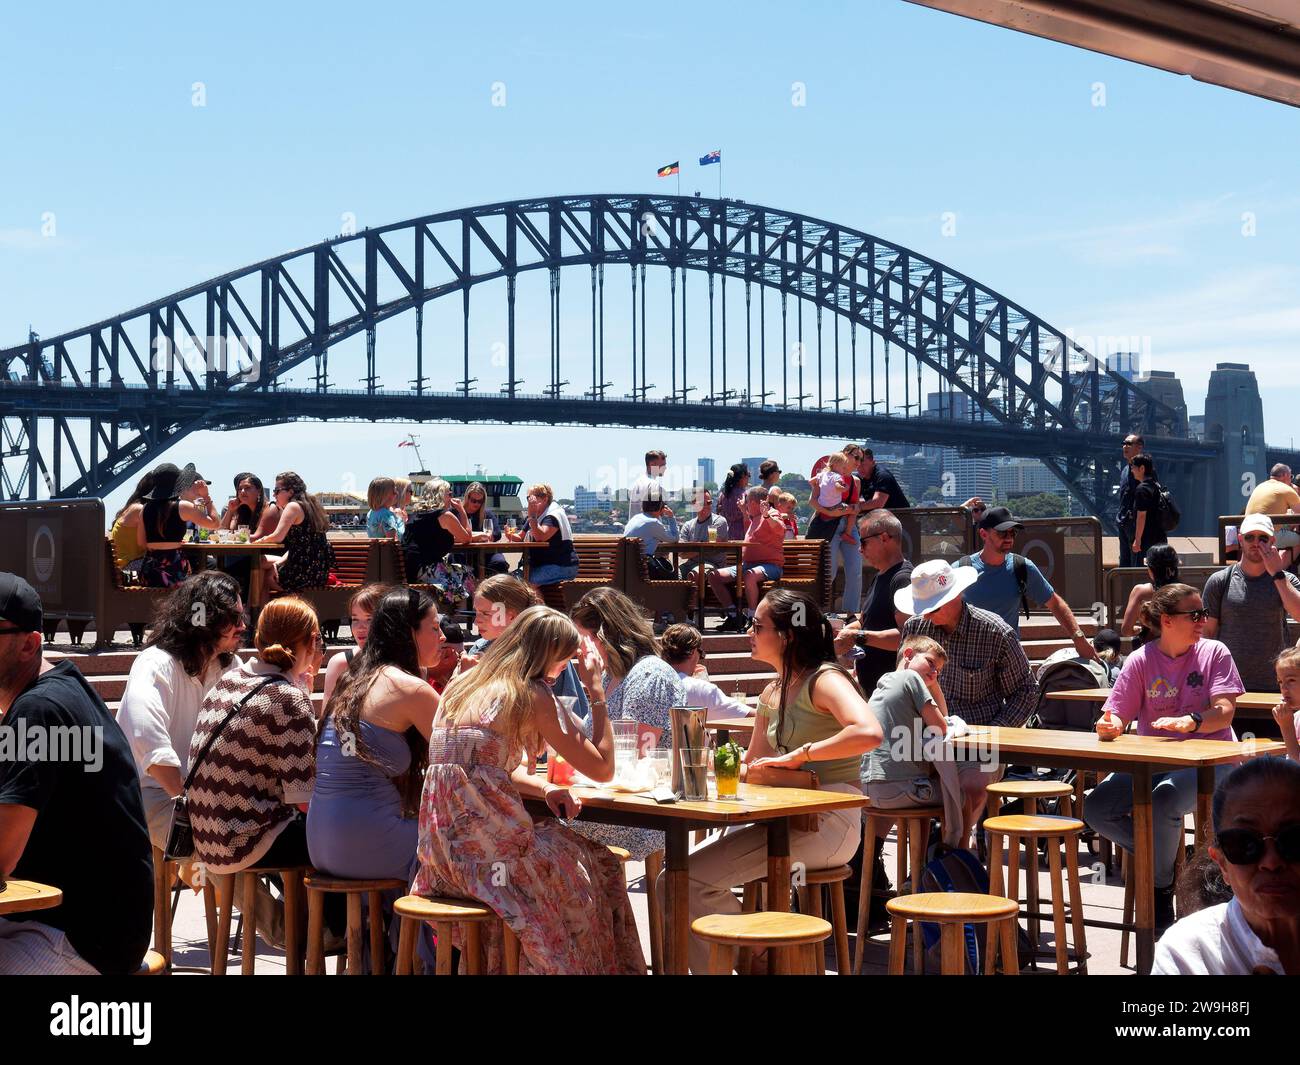 View of diners on the concourse at the Sydney Opera House with the famous Sydney Harbour Bridge in the background Stock Photo